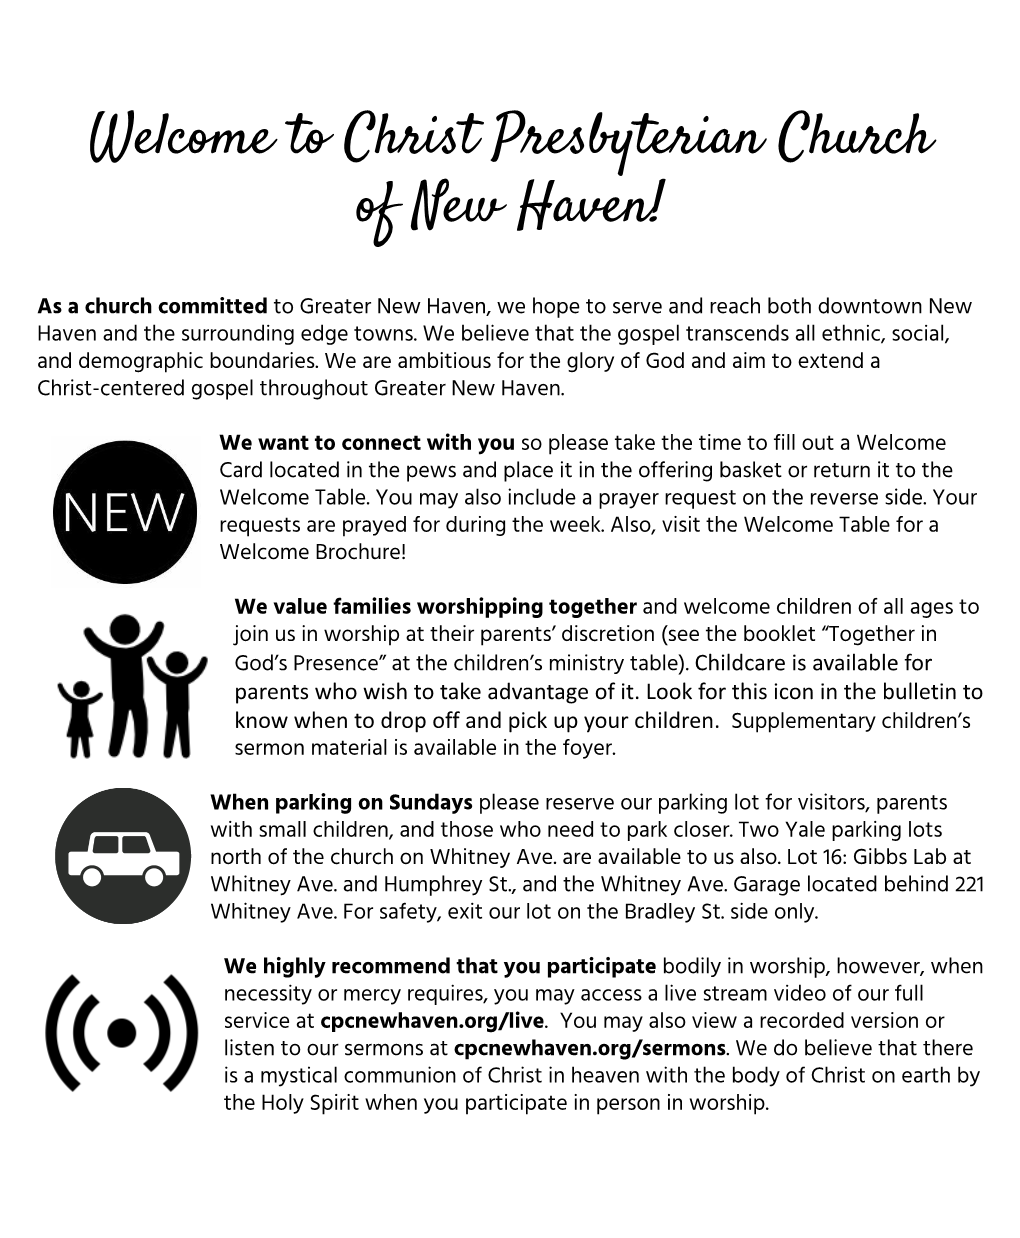 Welcome to Christ Presbyterian Church of New Haven!